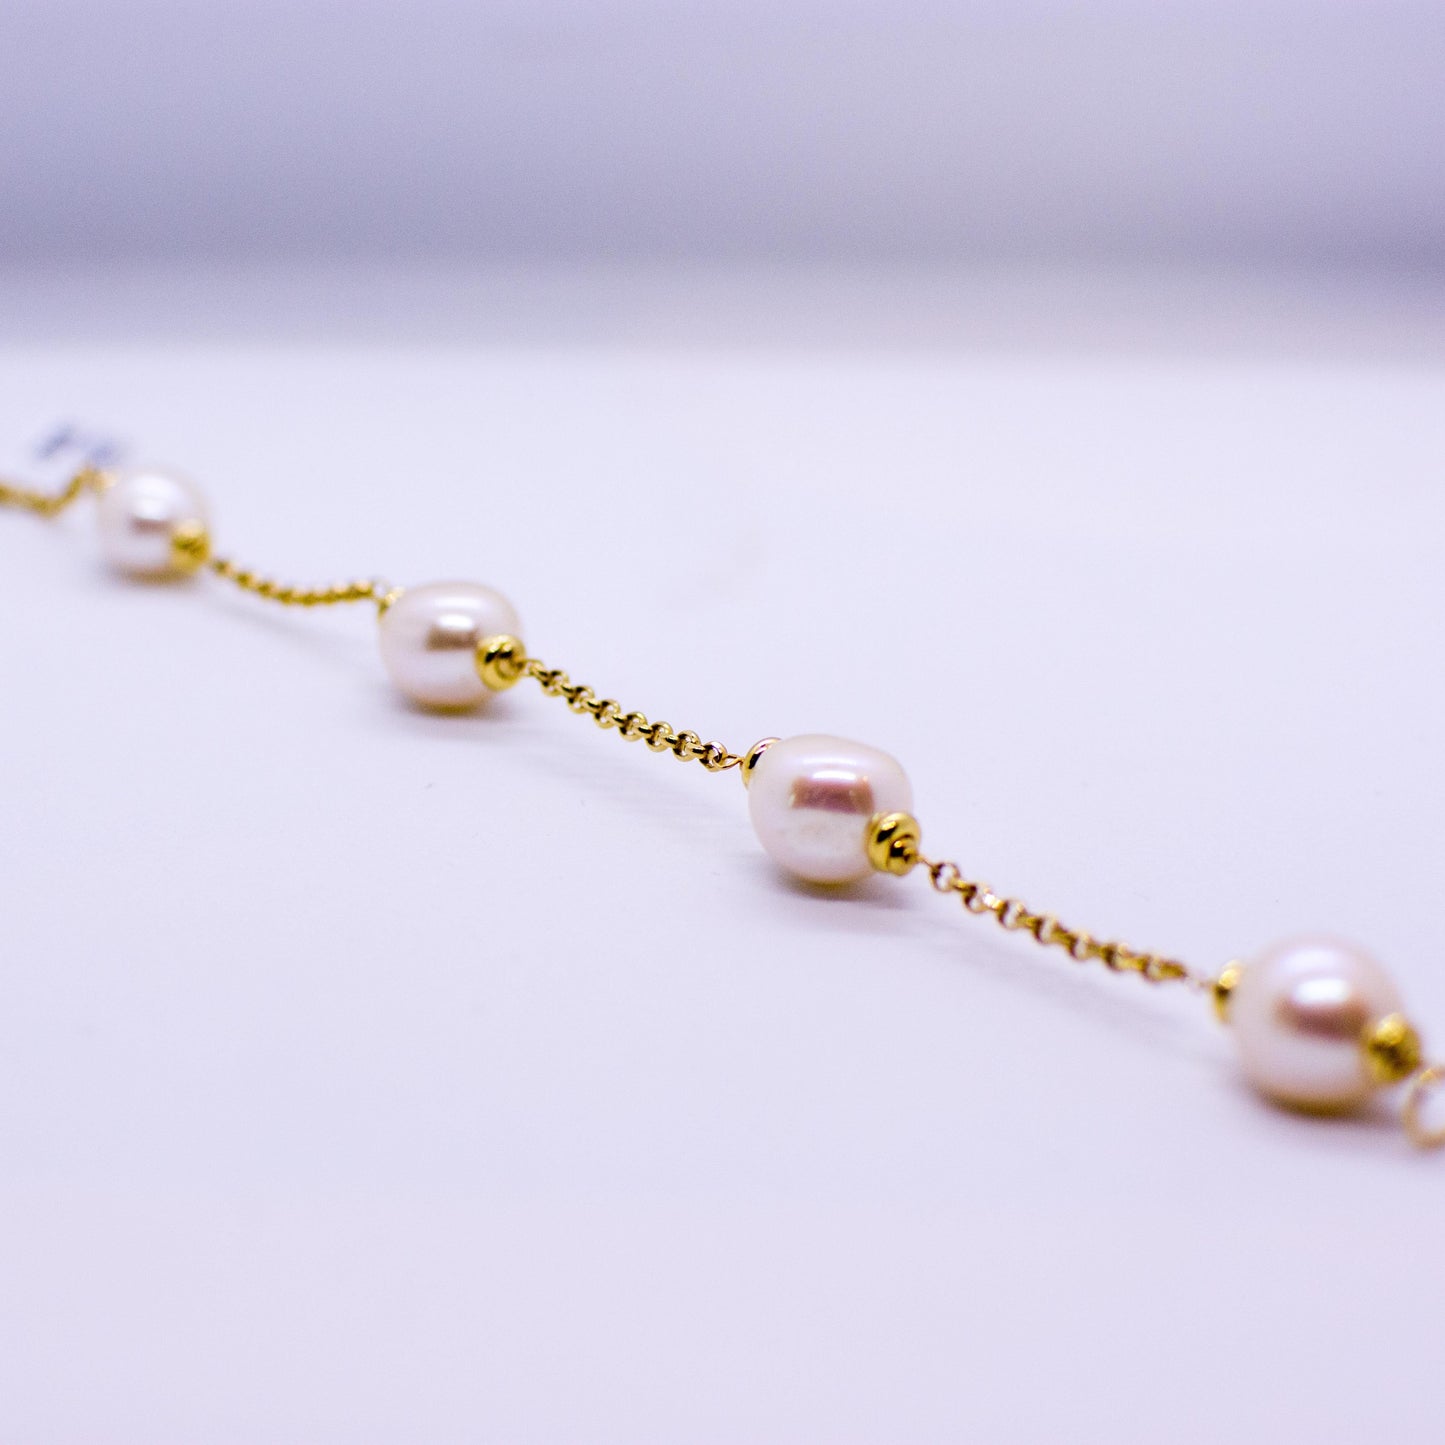 18ct Gold Cultured Freshwater Pearl and Chain Bracelet Pearl dimensions: 10mm x 12mm approximately Diamond cut 2mm gauge solid trace chain 19cm long 18ct yellow gold This item can be ordered in a variety of lengths.  Please contact us for custom requirements.